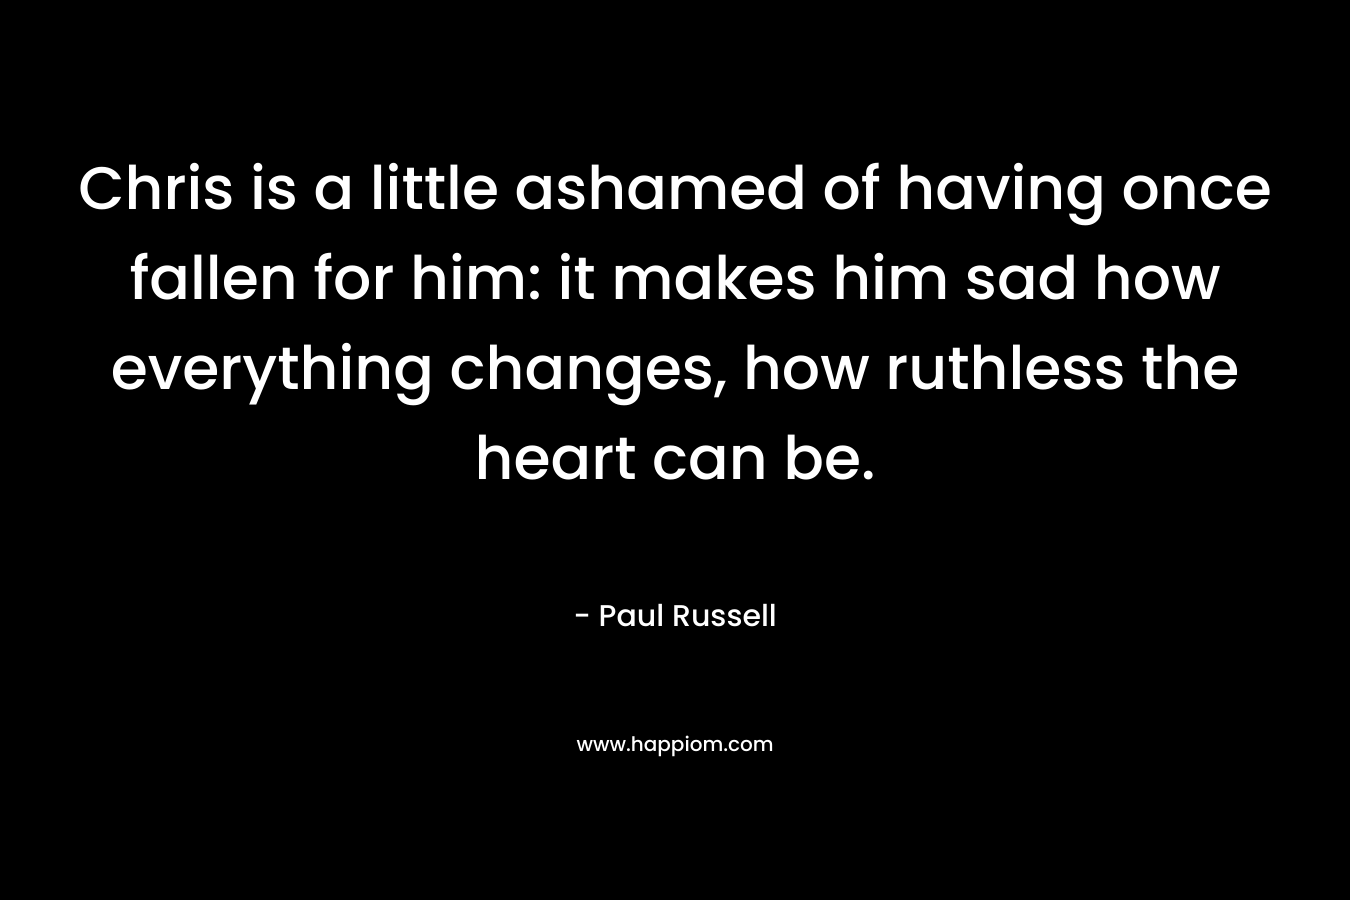 Chris is a little ashamed of having once fallen for him: it makes him sad how everything changes, how ruthless the heart can be. – Paul Russell